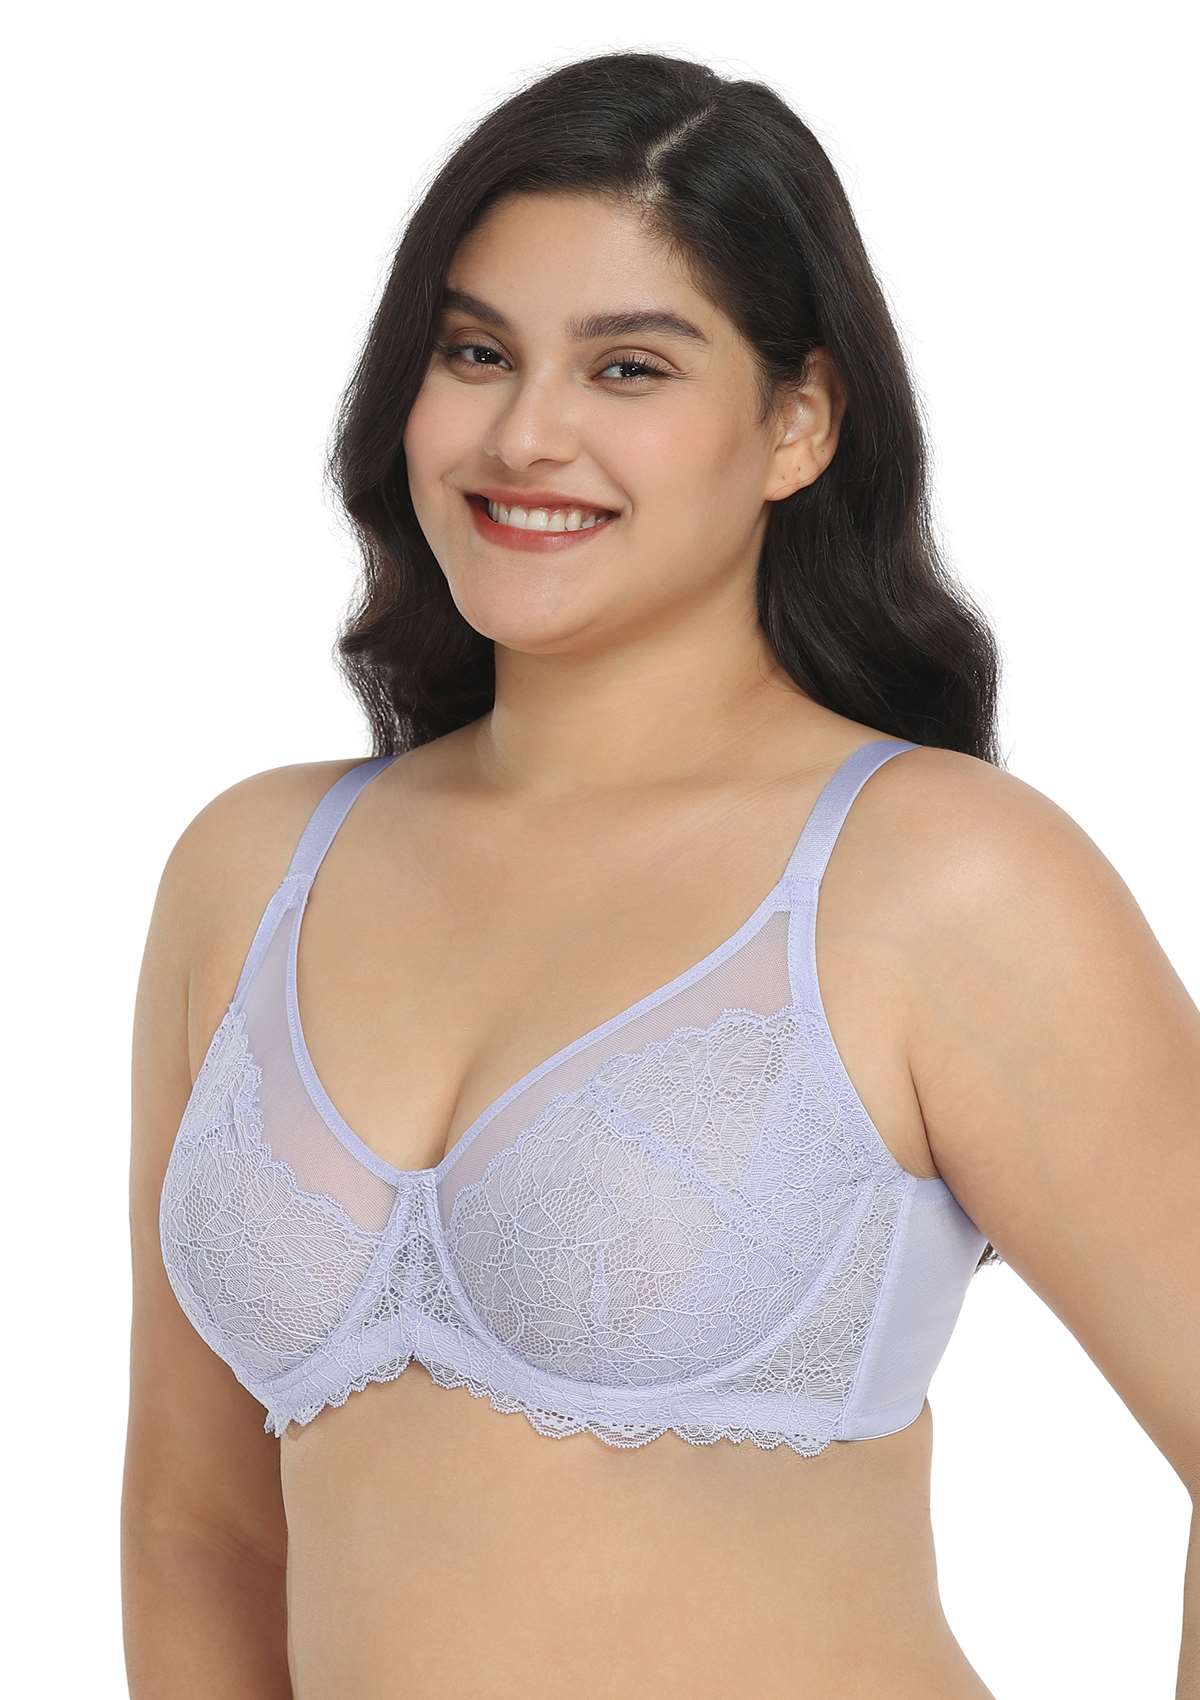 HSIA Wisteria Bra For Lift And Support - Full Coverage Minimizer Bra - Light Pink / 38 / DDD/F